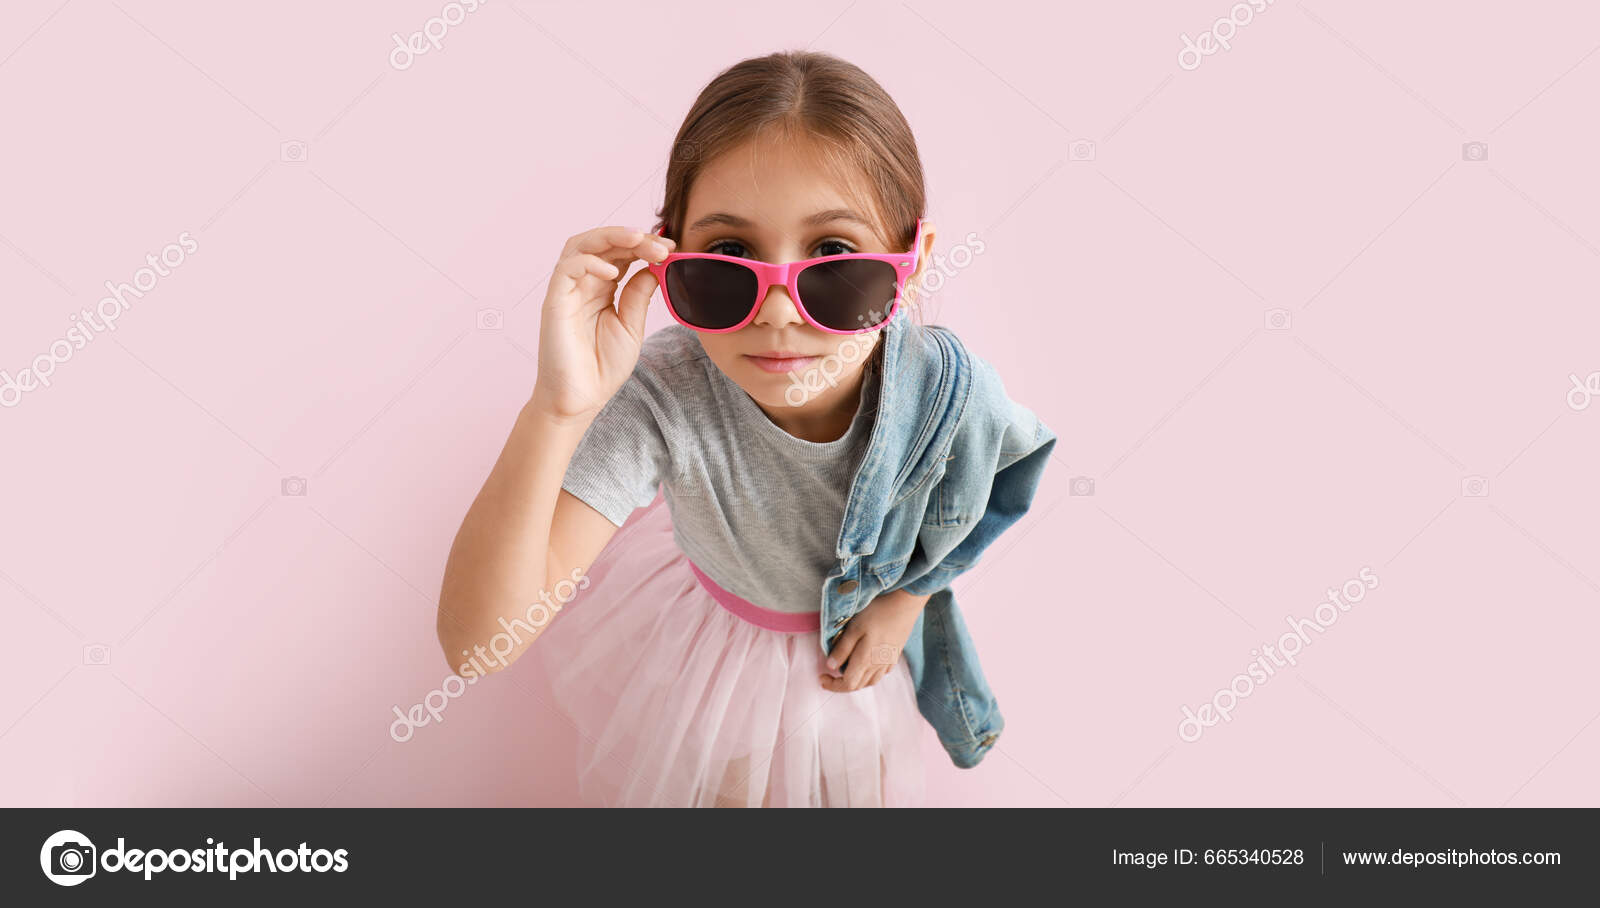 Woman Wearing Sunglasses Is Looking At Her Phone Background, A High School  Girl Wearing Sunglasses And Looking At A Smartphone, Hd Photography Photo,  Glasses Background Image And Wallpaper for Free Download